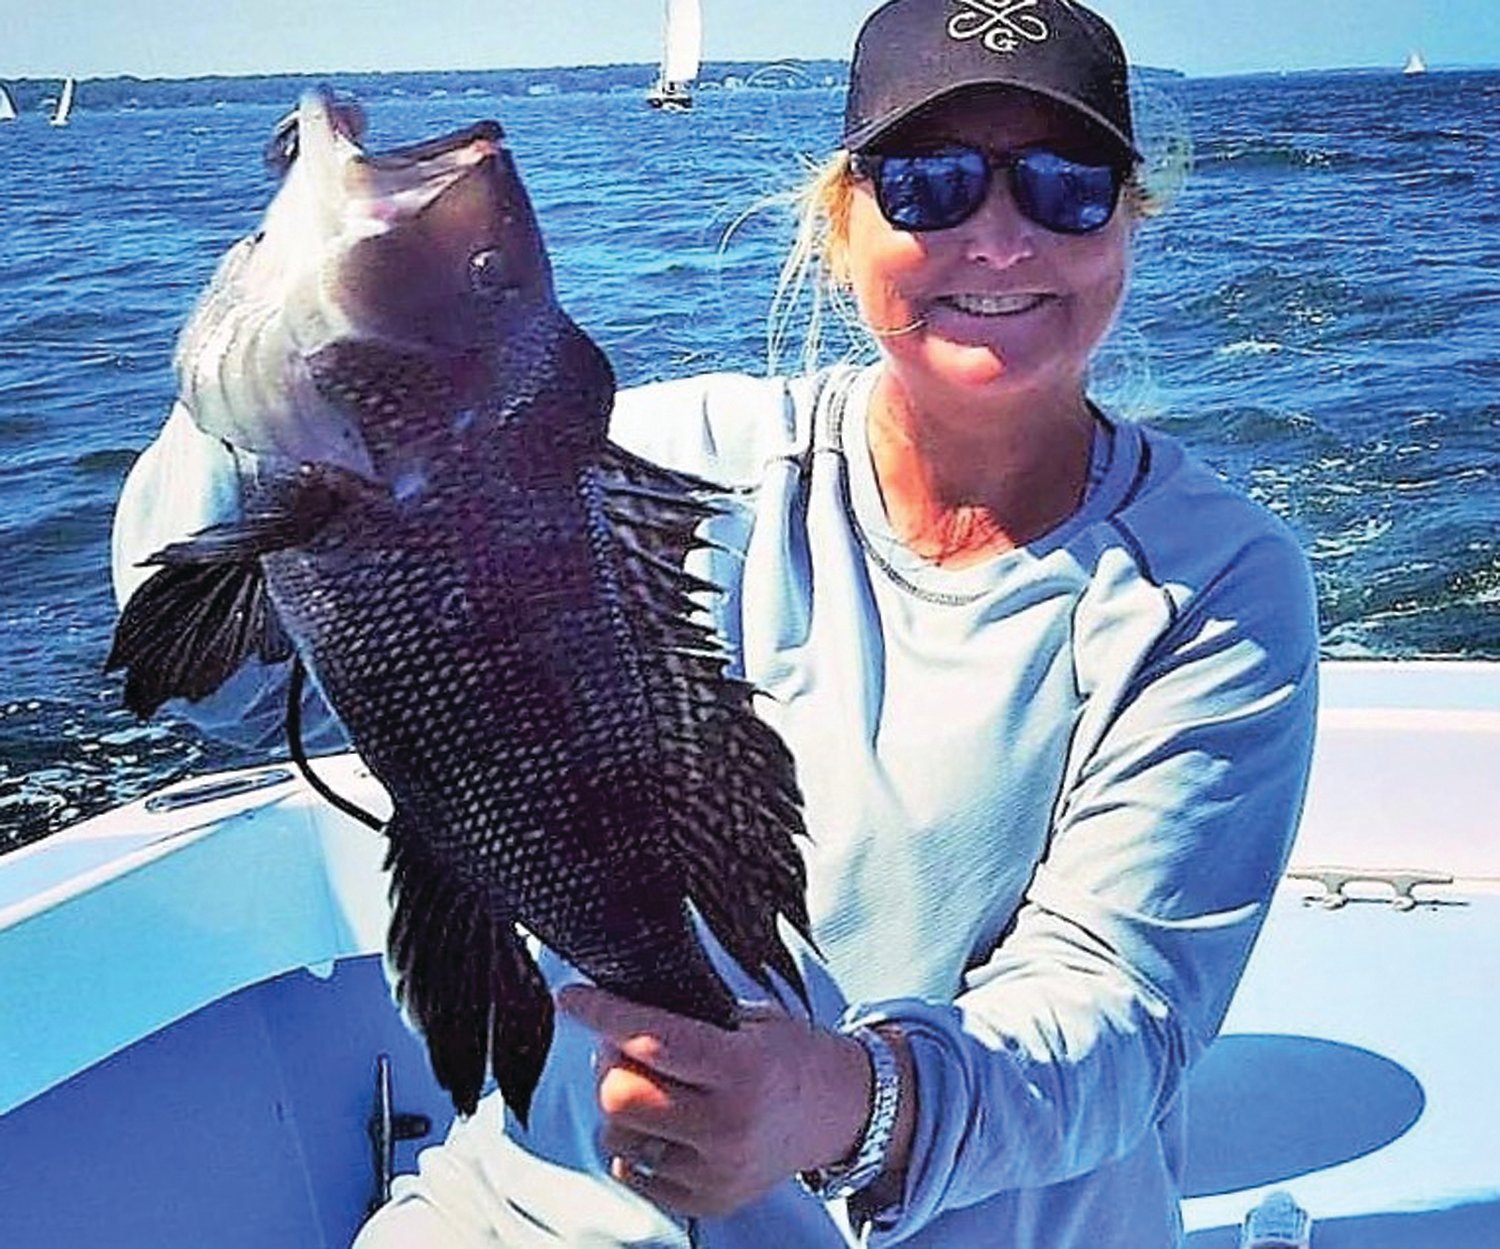 BLACK SEA BASS: Catching keeper black sea bass (15” and over) is difficult after June and July in our Bays as the water warms and large fish move to cooler waters in the lower Bay or offshore. (Submitted photo)